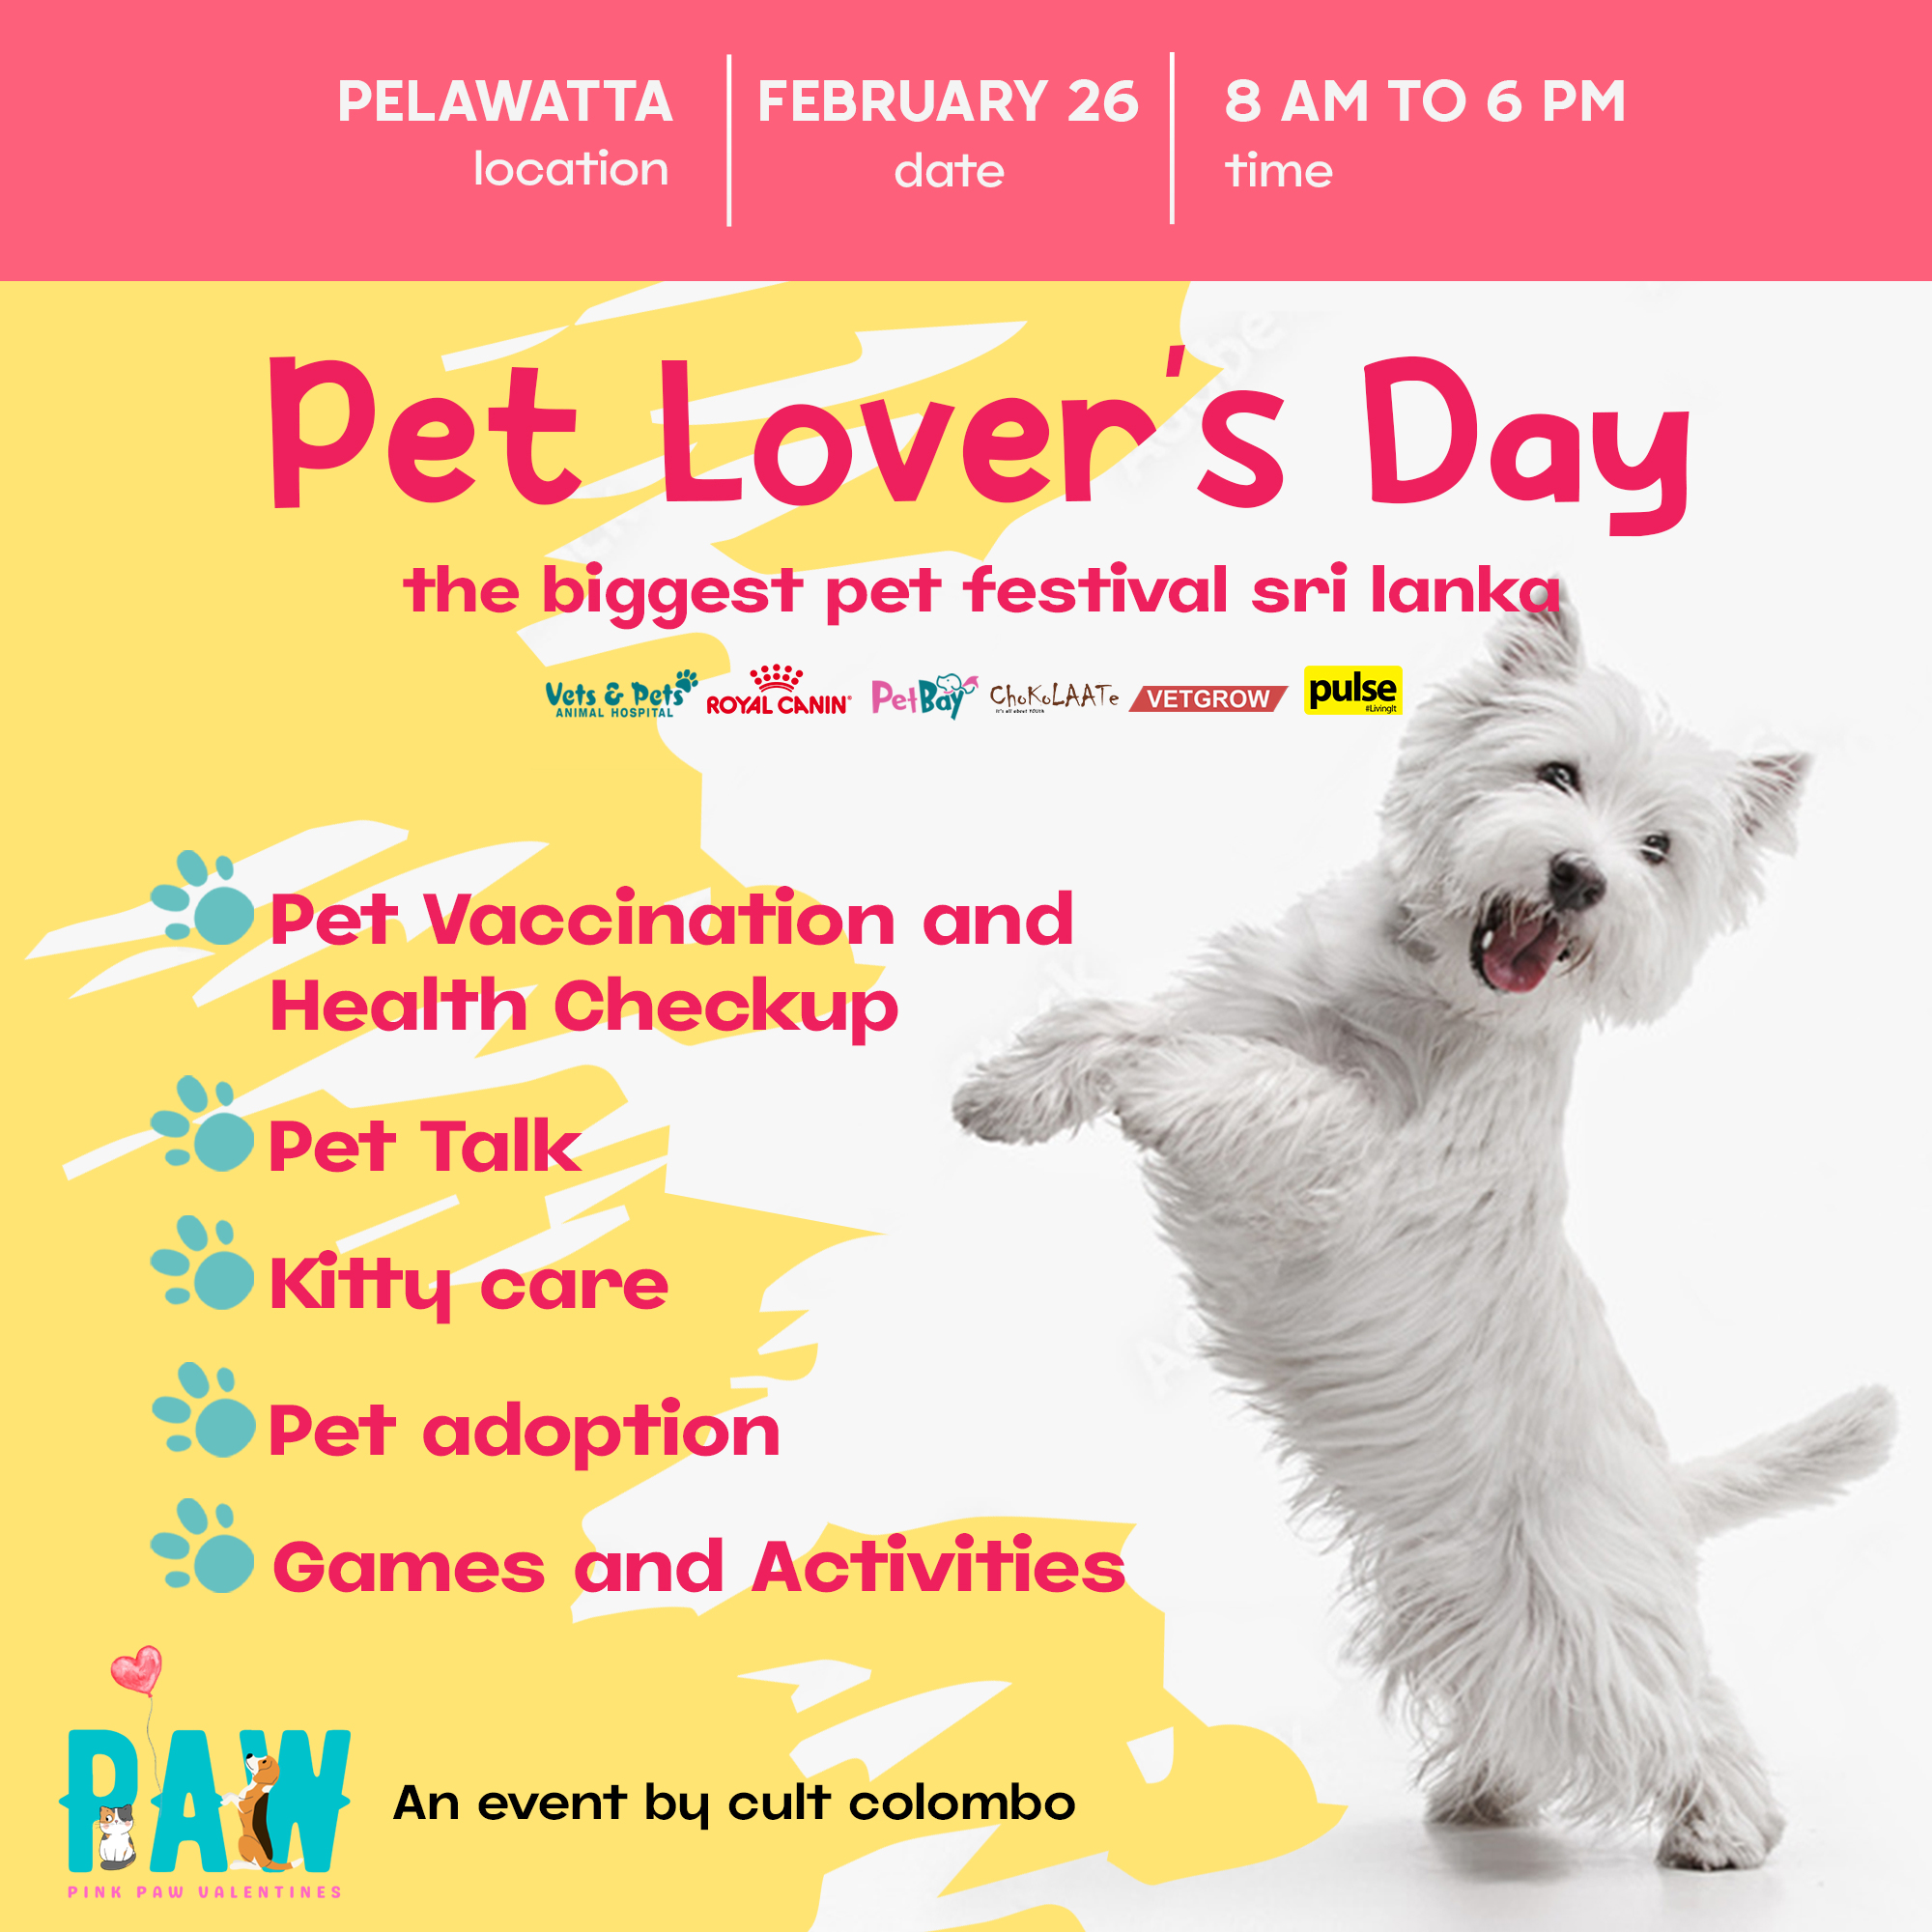 “Pink Paw: a celebration of our furry friends”